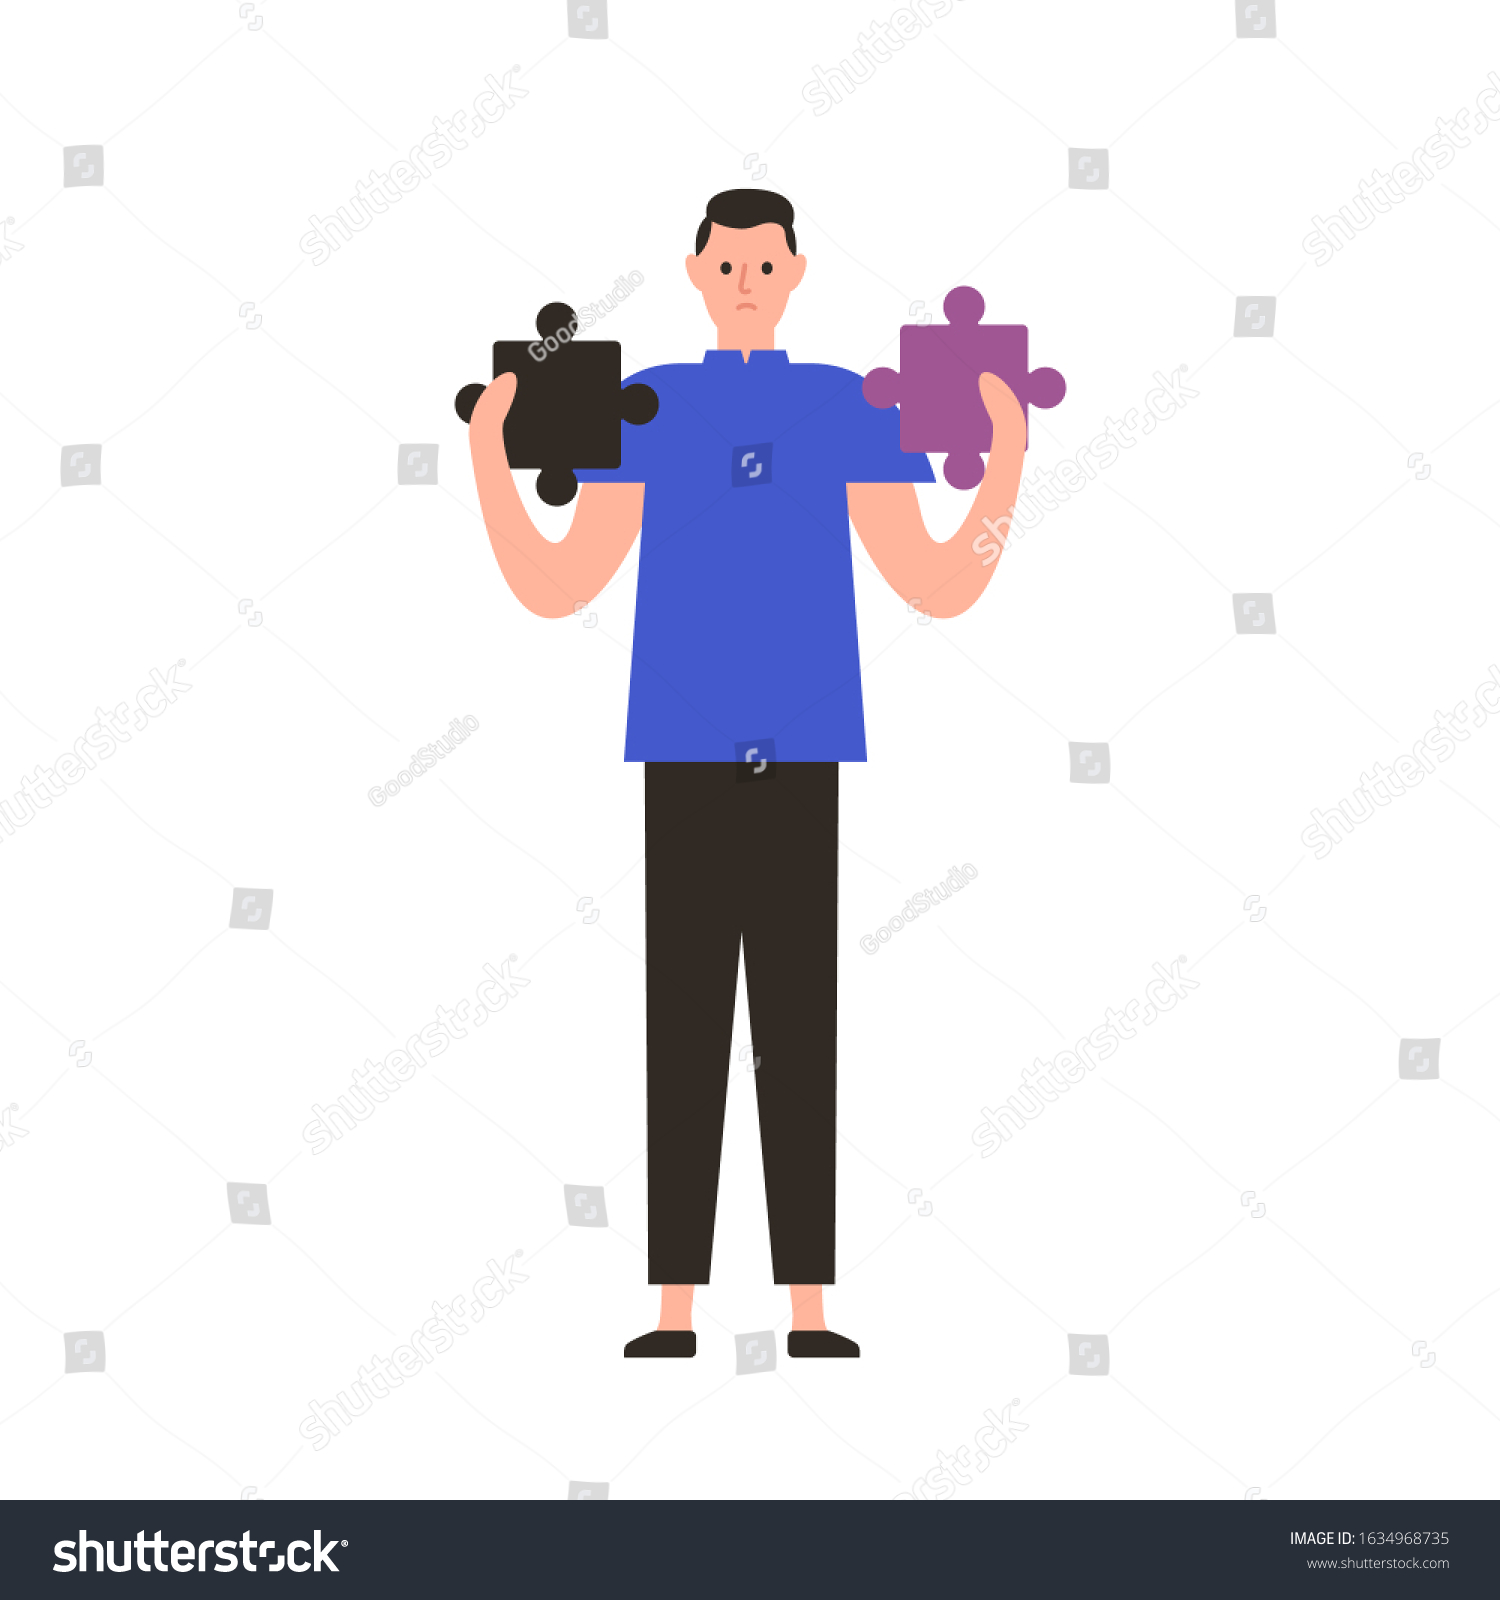 SVG of Unhappy cartoon man holding inappropriate jigsaw puzzle pieces vector flat illustration. Concept of problem solving, difficult in business, no solution found. Lonely sad guy having trouble svg